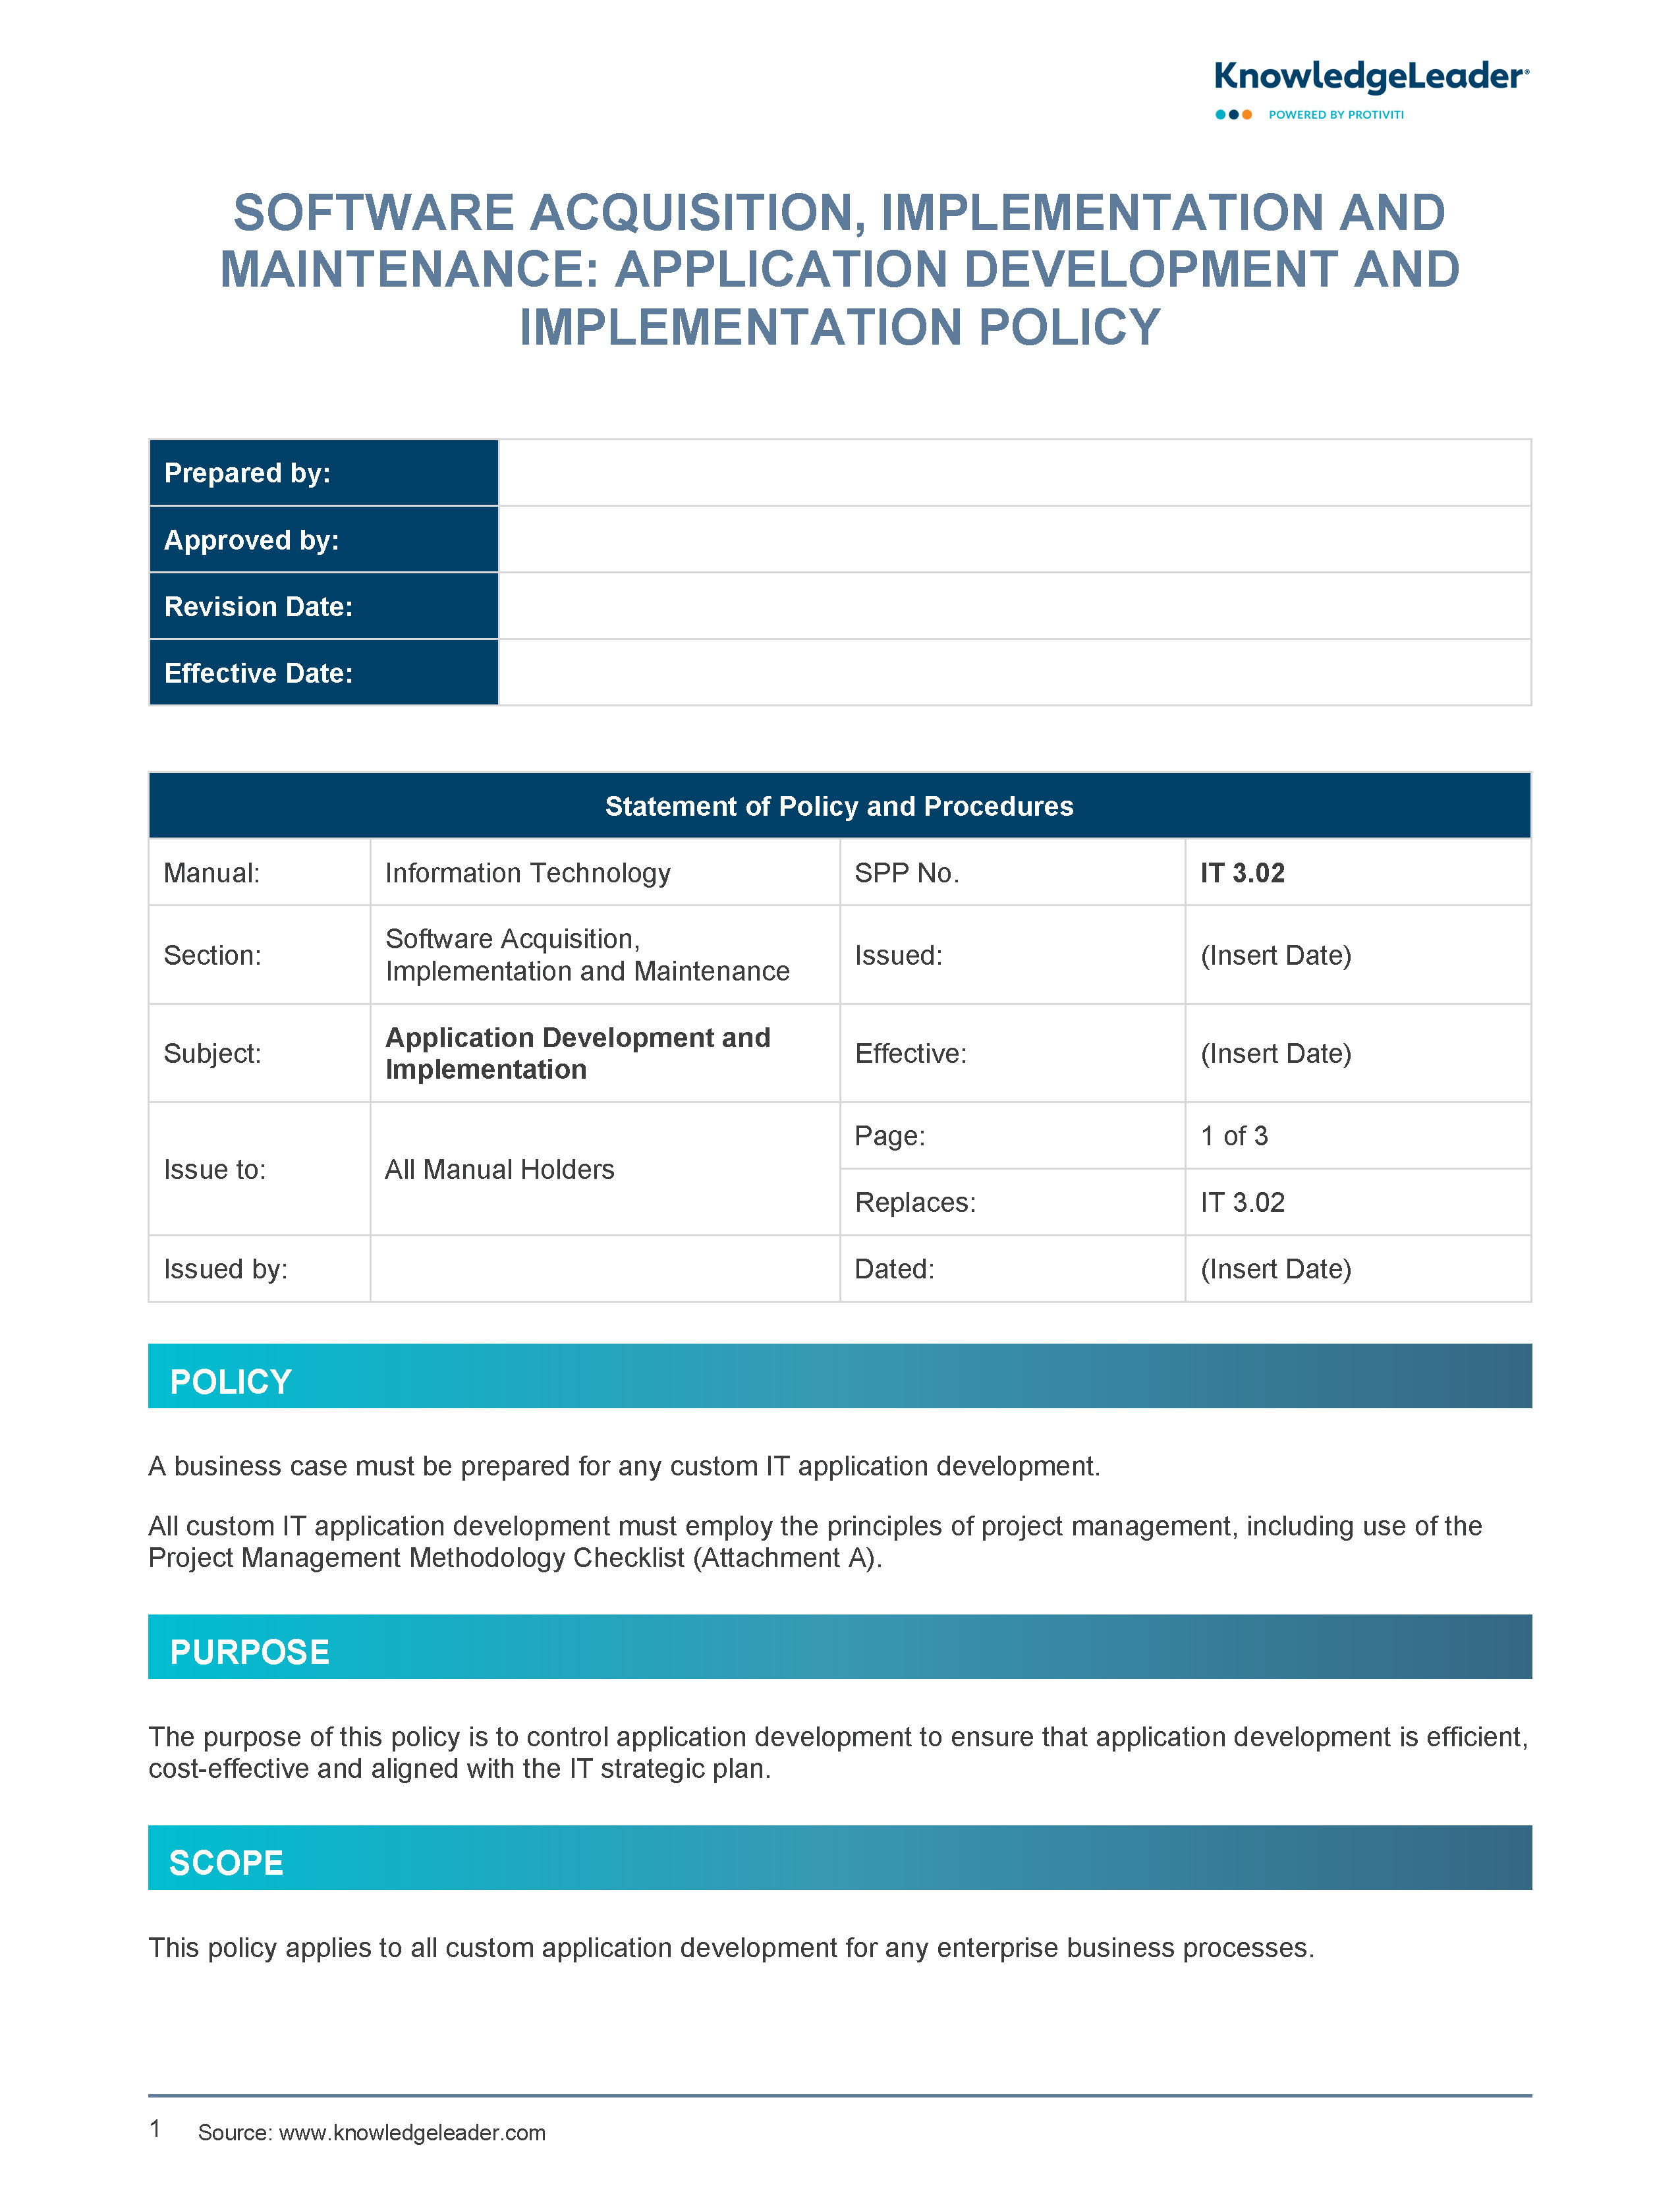 Screenshot of the first page of Software Acquisition, Implementation and Maintenance - Application Development and Implementation Policy